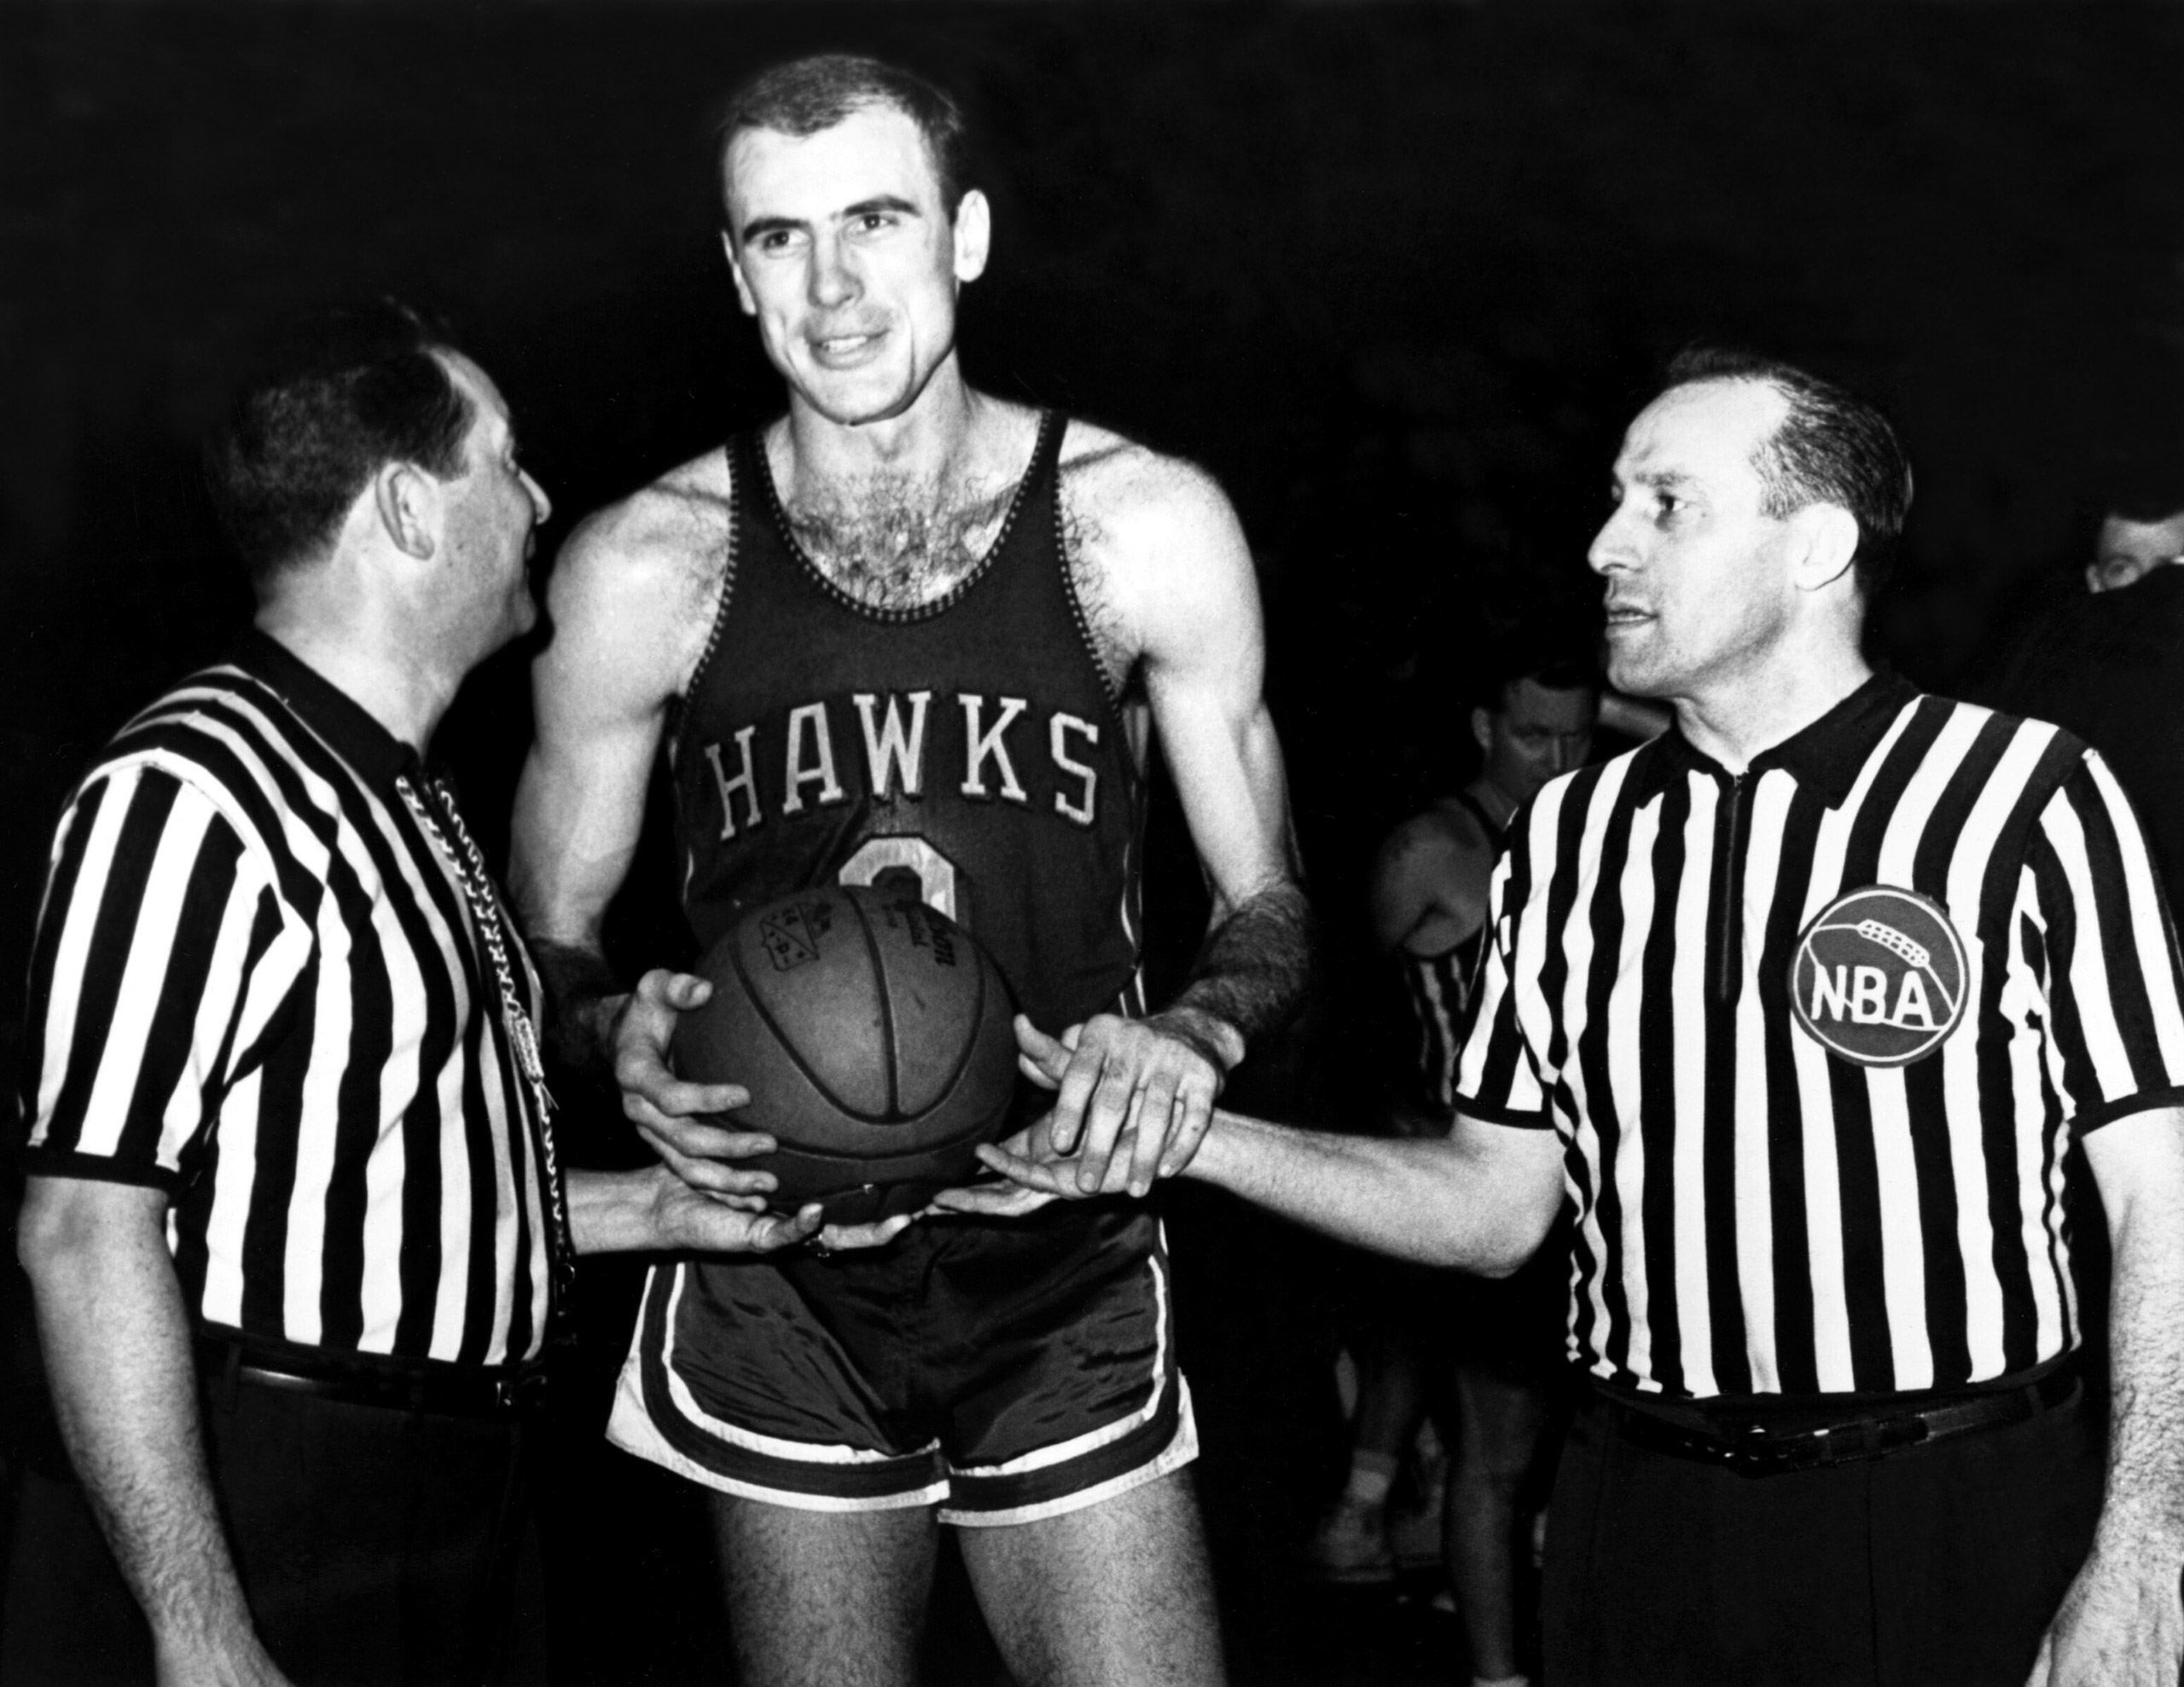 Bob Pettit of the St. Louis Hawks poses for a  portrait with referees circa 1955.